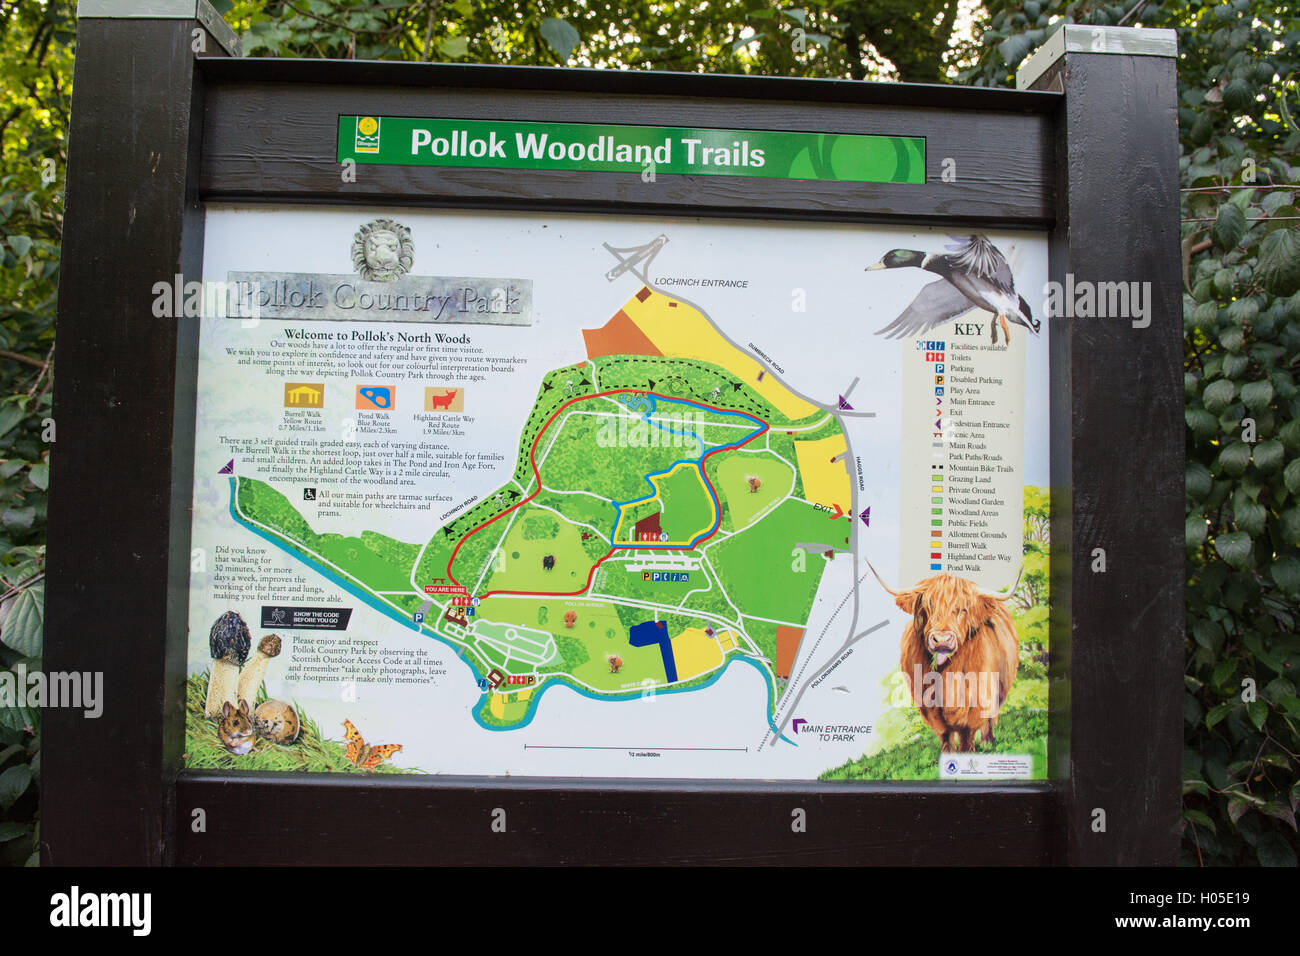 Pollok Country Park Woodland Trails information map Stock Photo